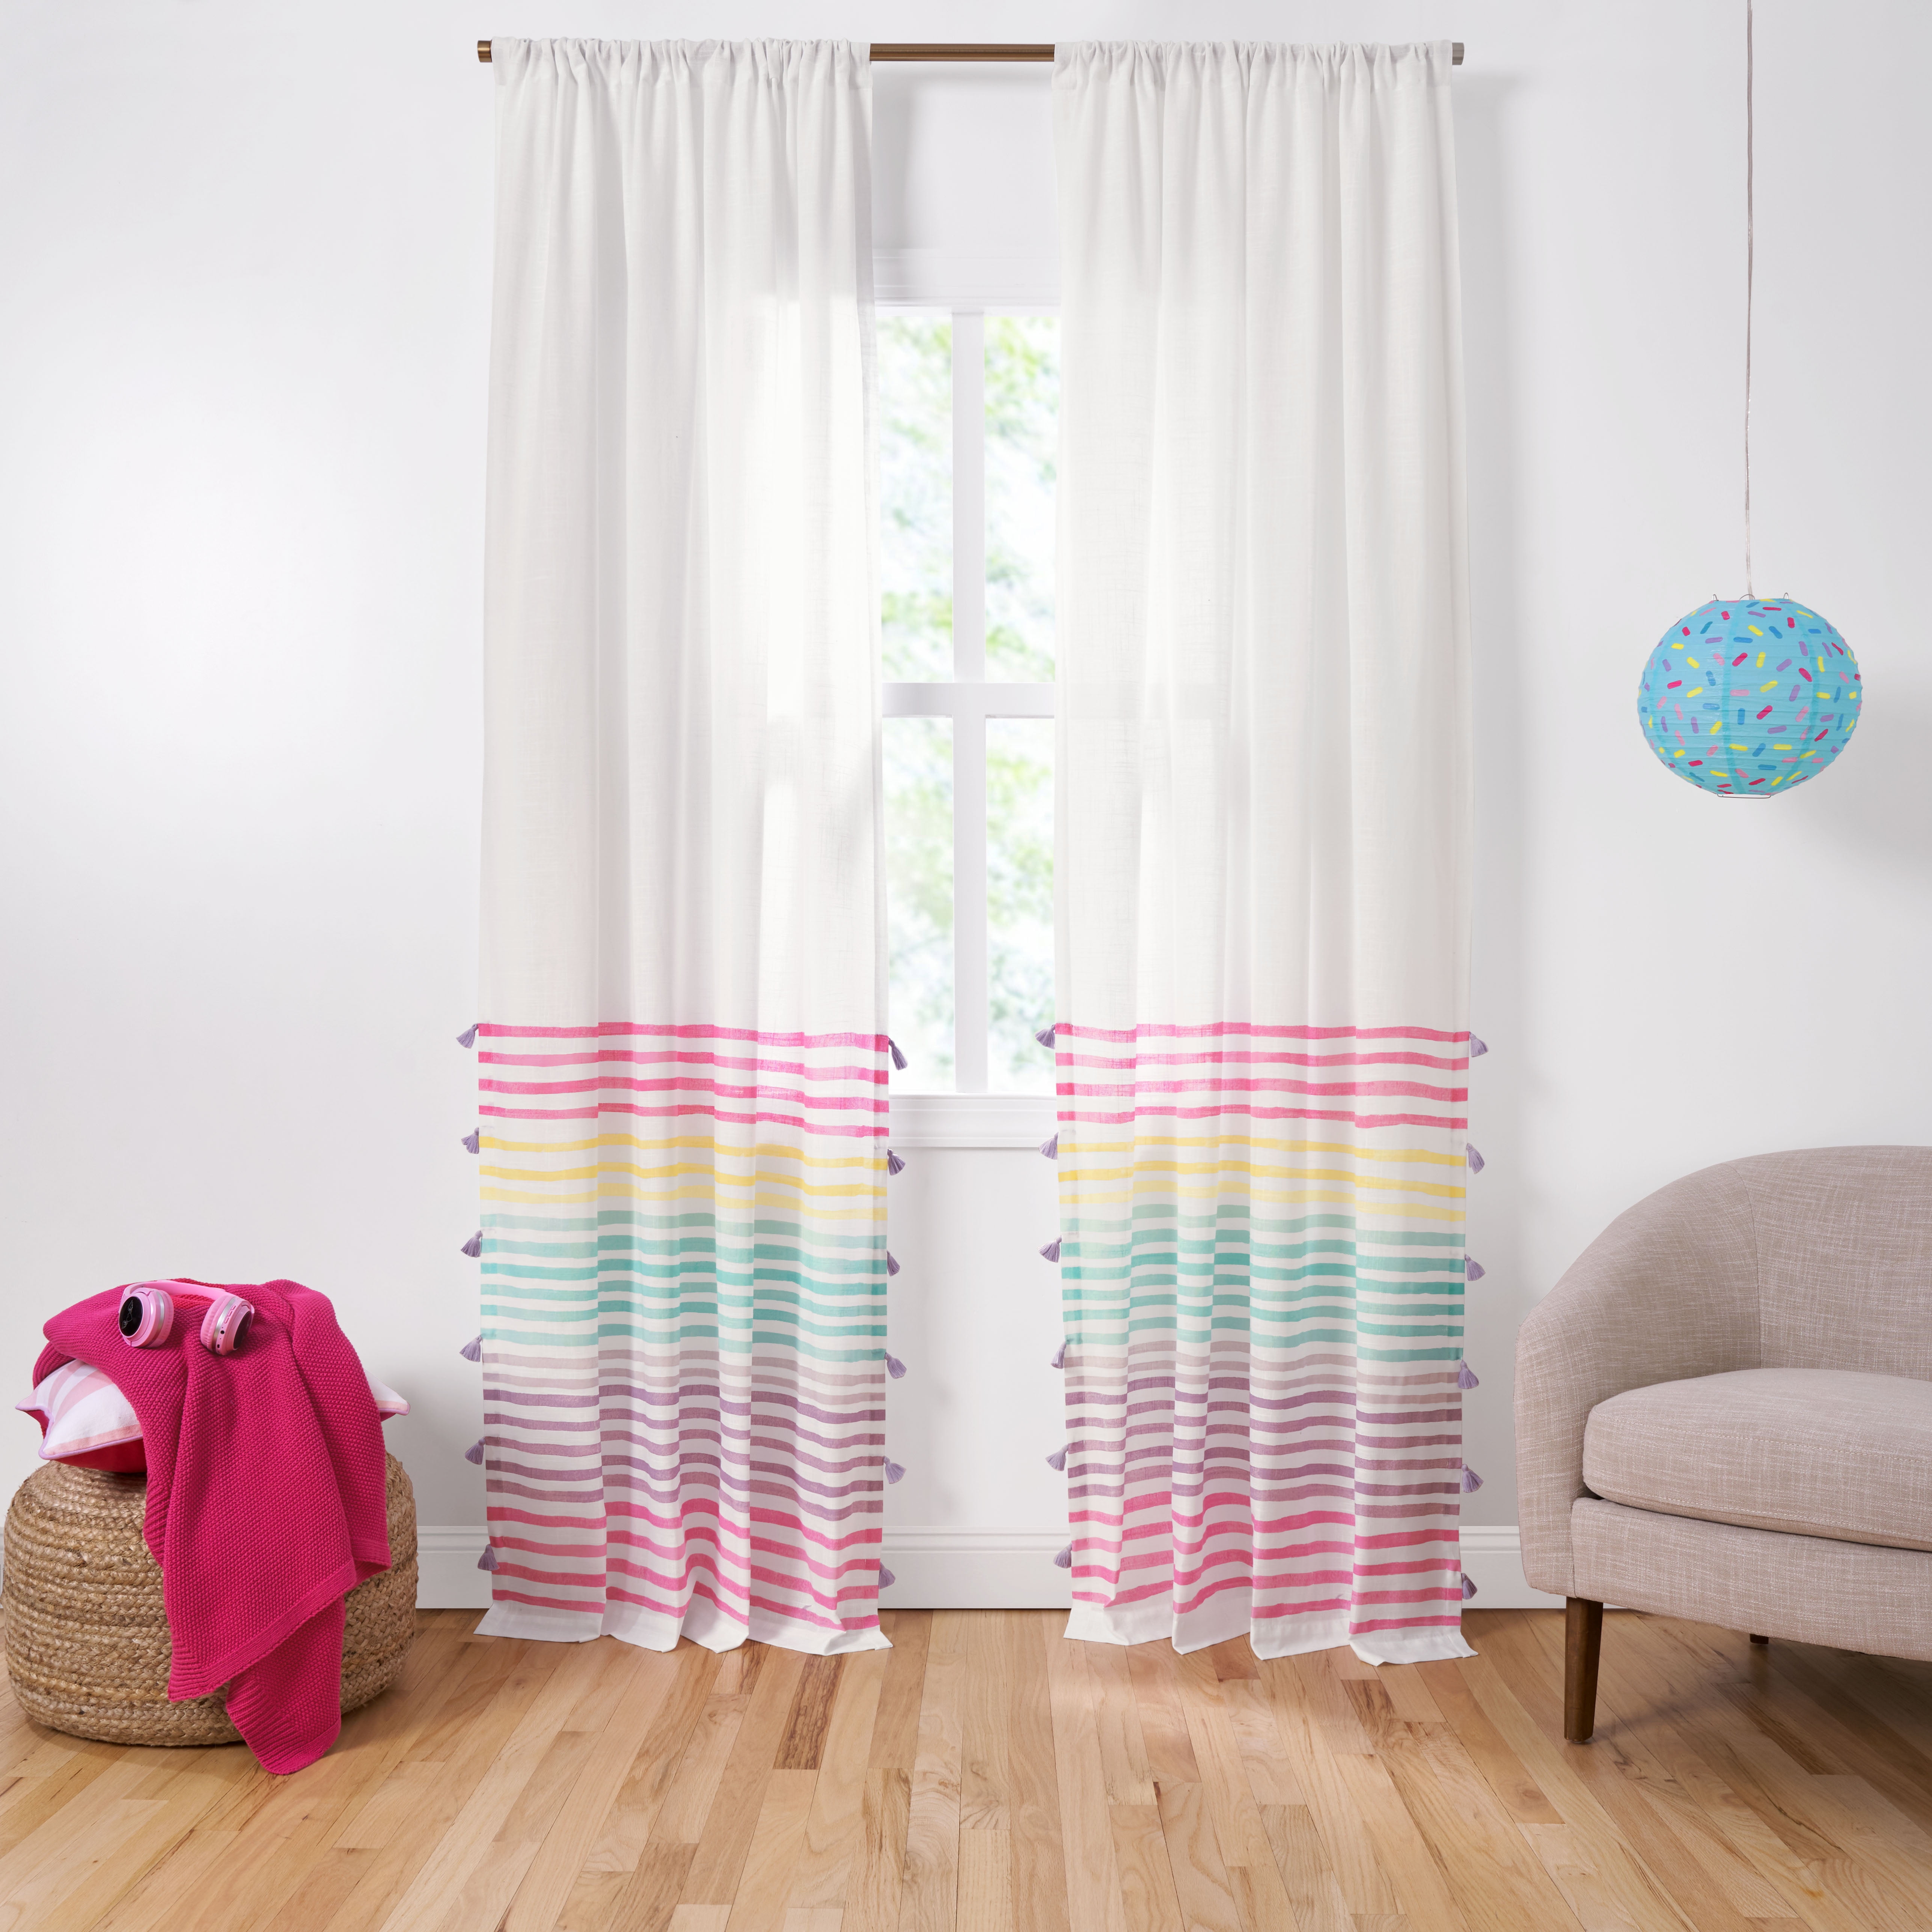 Kids girls Bedroom curtains fully lined Taptop free Tie-backs 